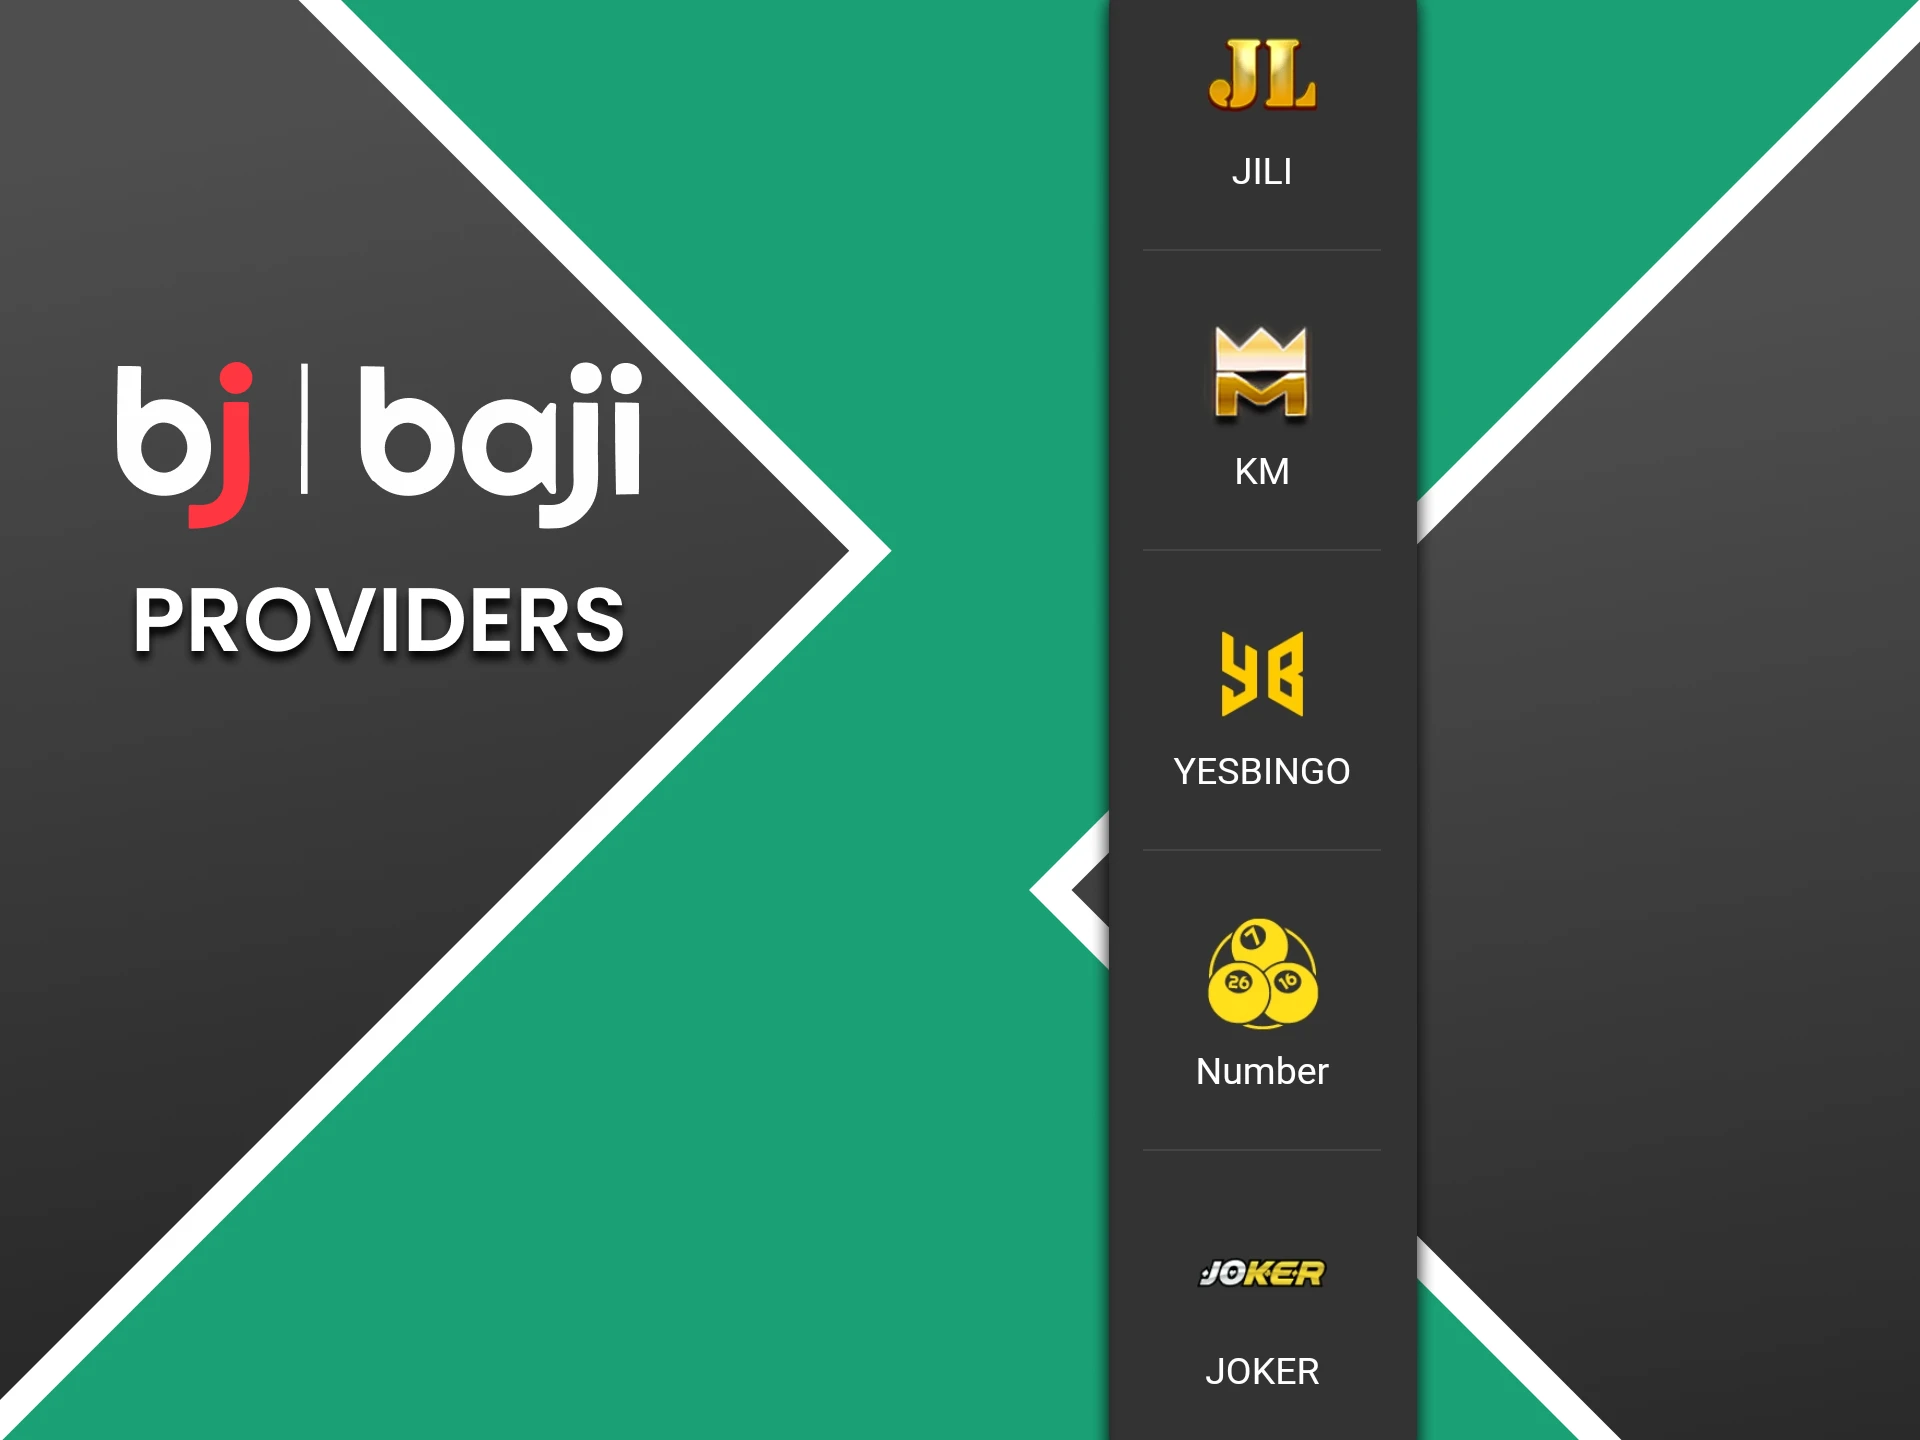 We will tell you about the providers on the Baji website.